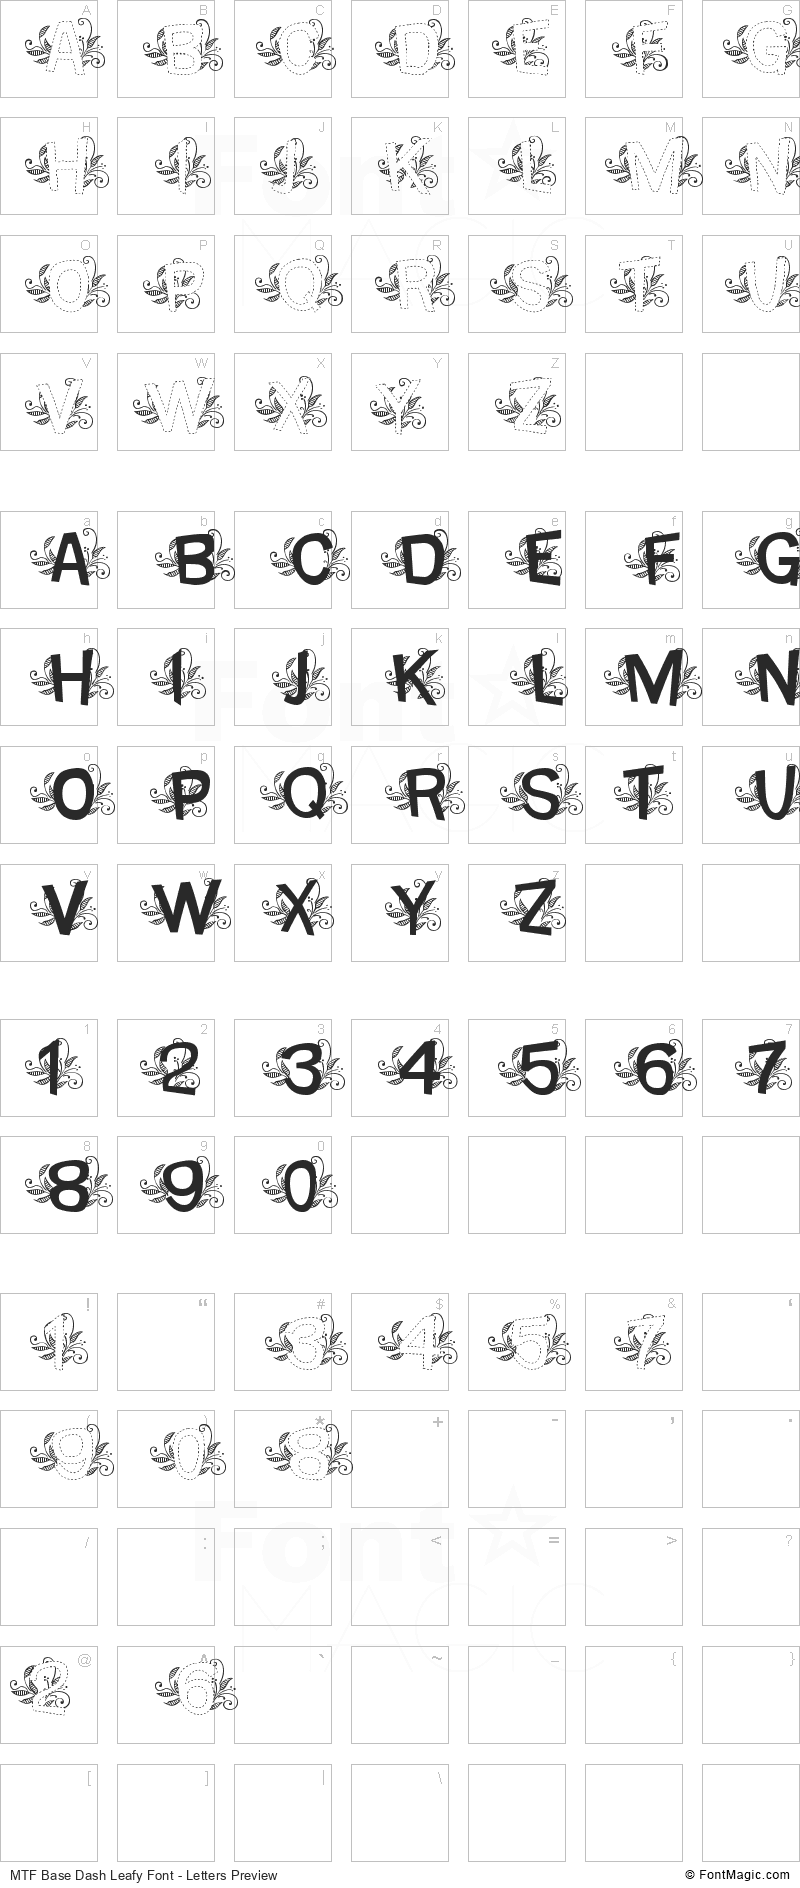 MTF Base Dash Leafy Font - All Latters Preview Chart